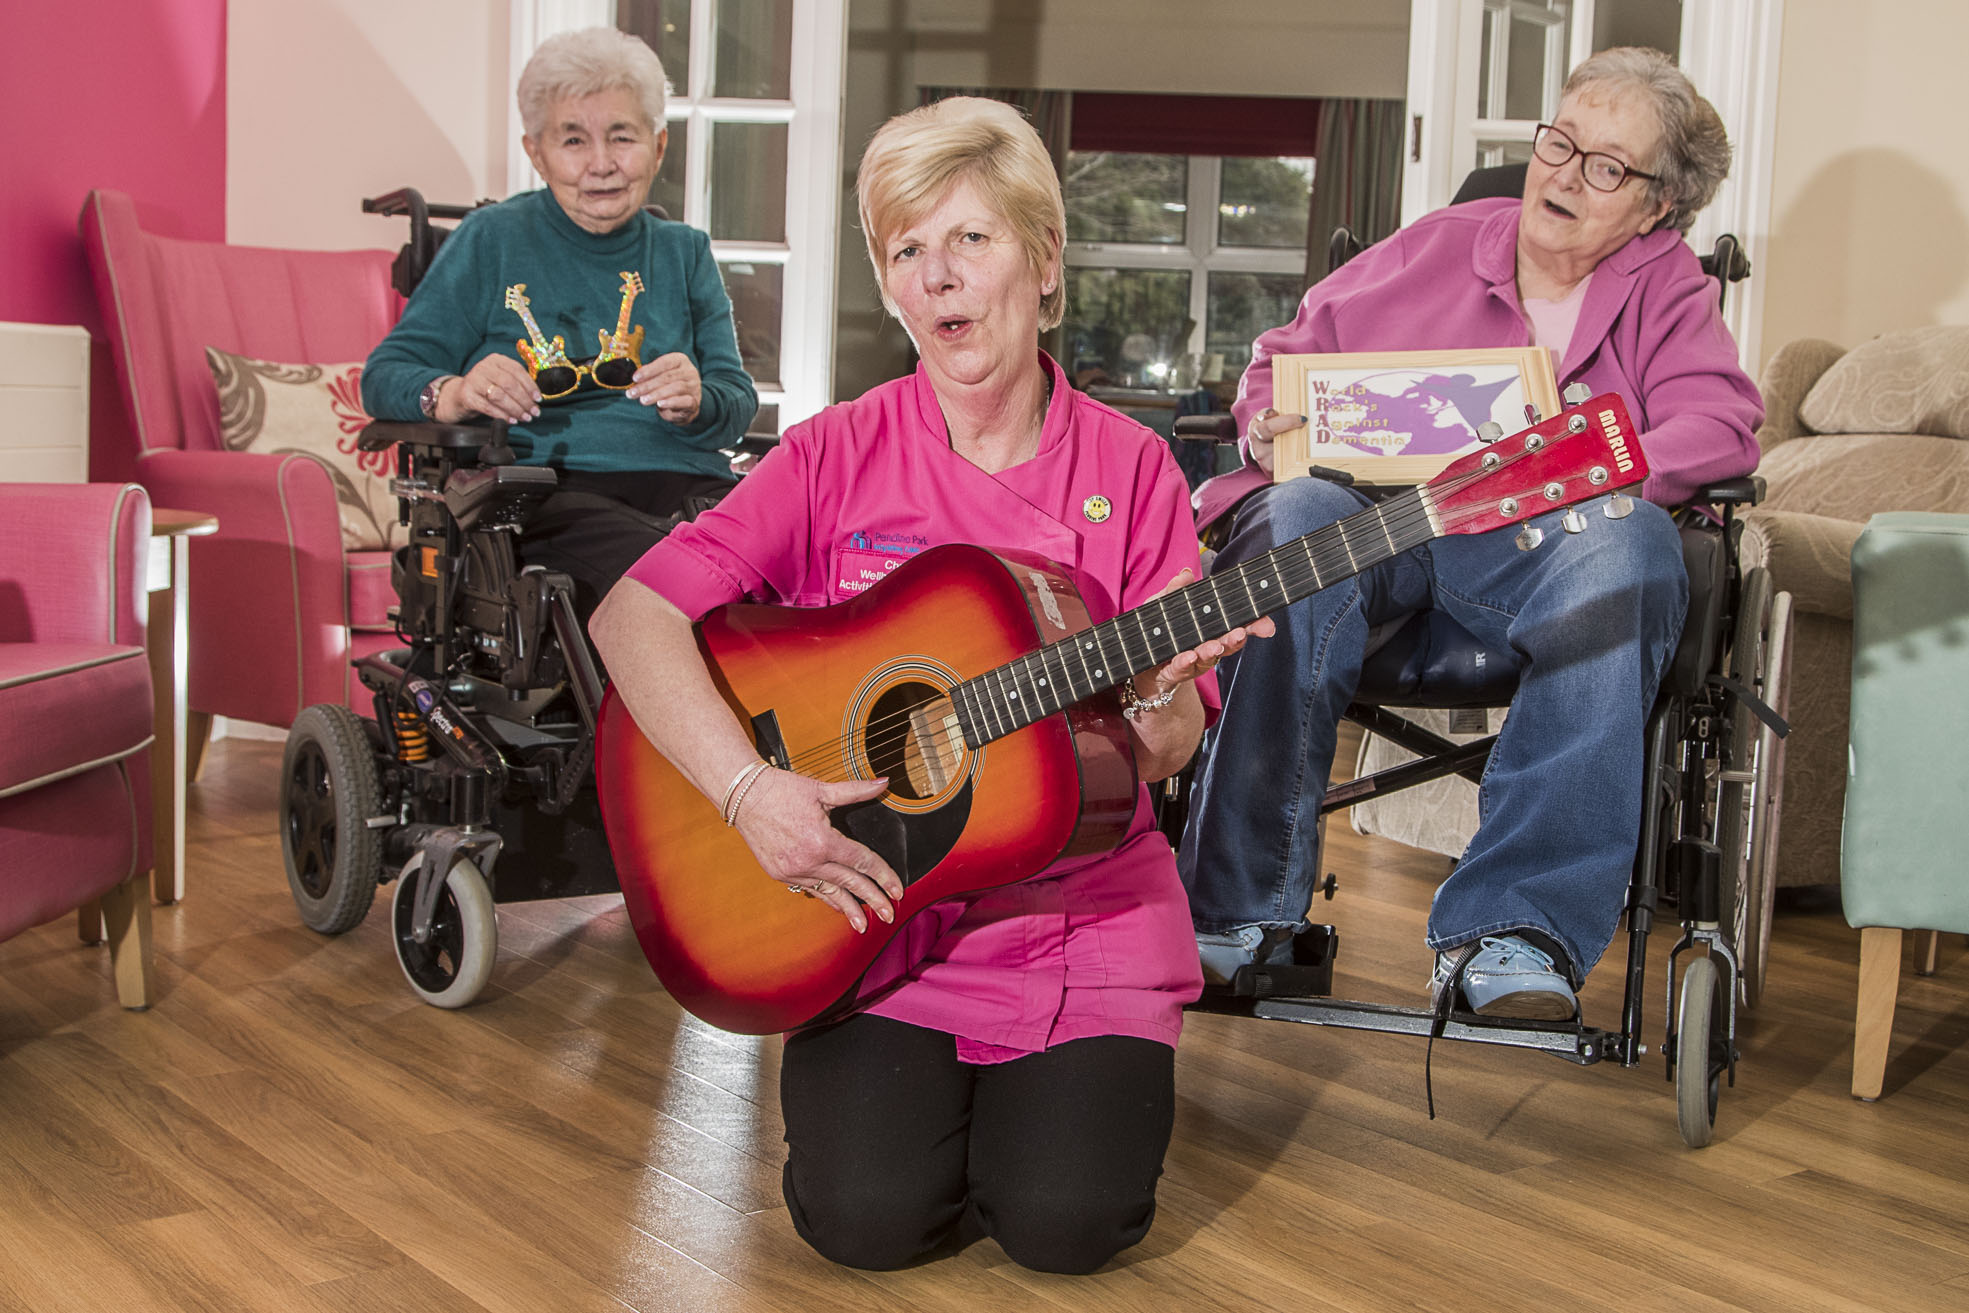 Making a song and dance about dementia